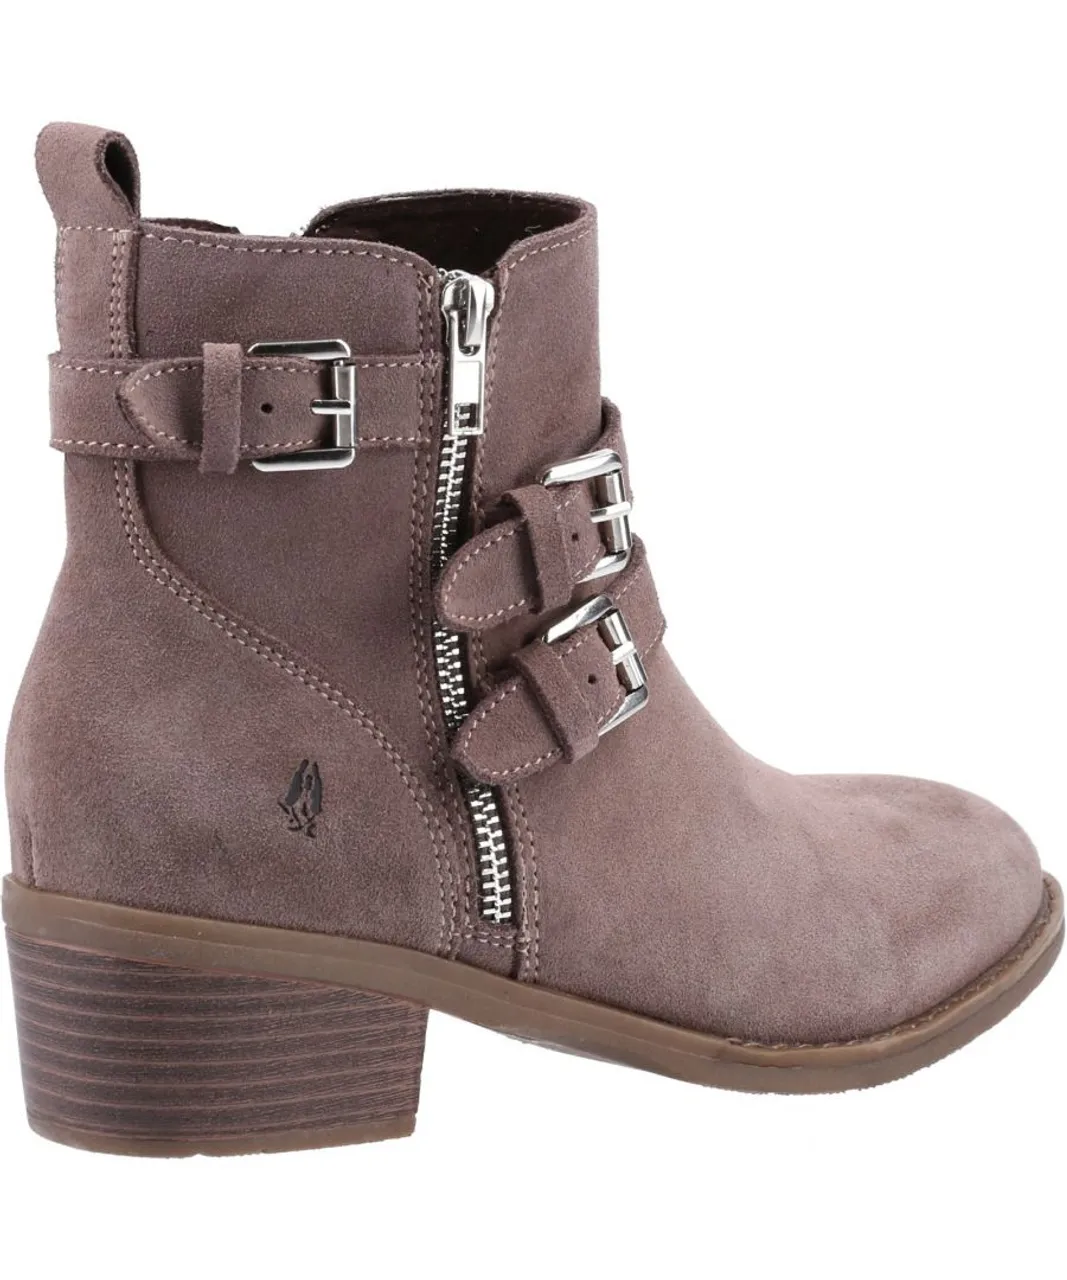 Hush Puppies Jenna Ankle Boot MEMORY FOAM Womens - Taupe Leather